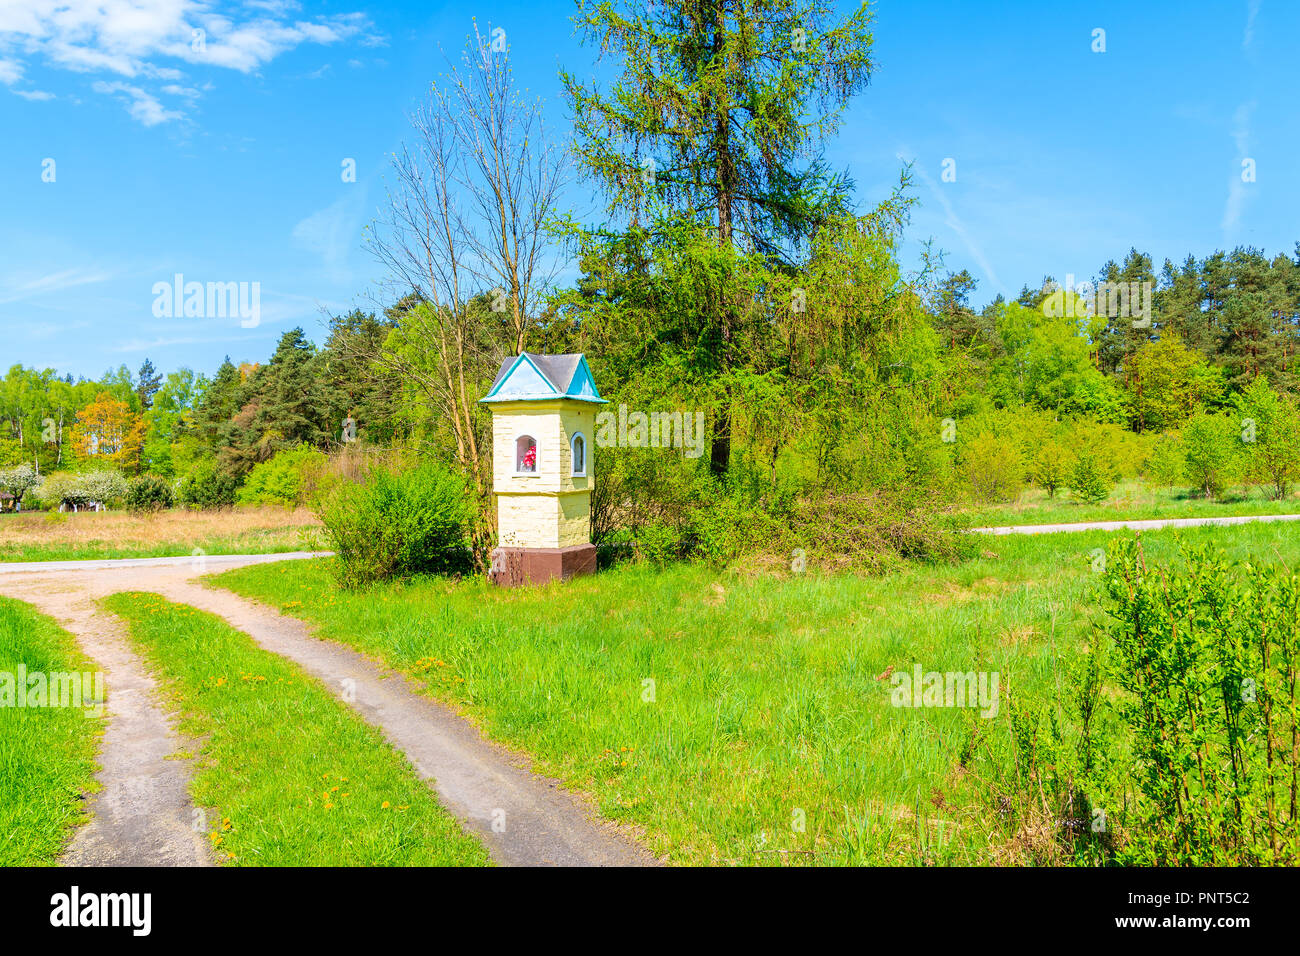 Small chapel on side of rural road with green trees near Krakow city during spring season, Poland Stock Photo